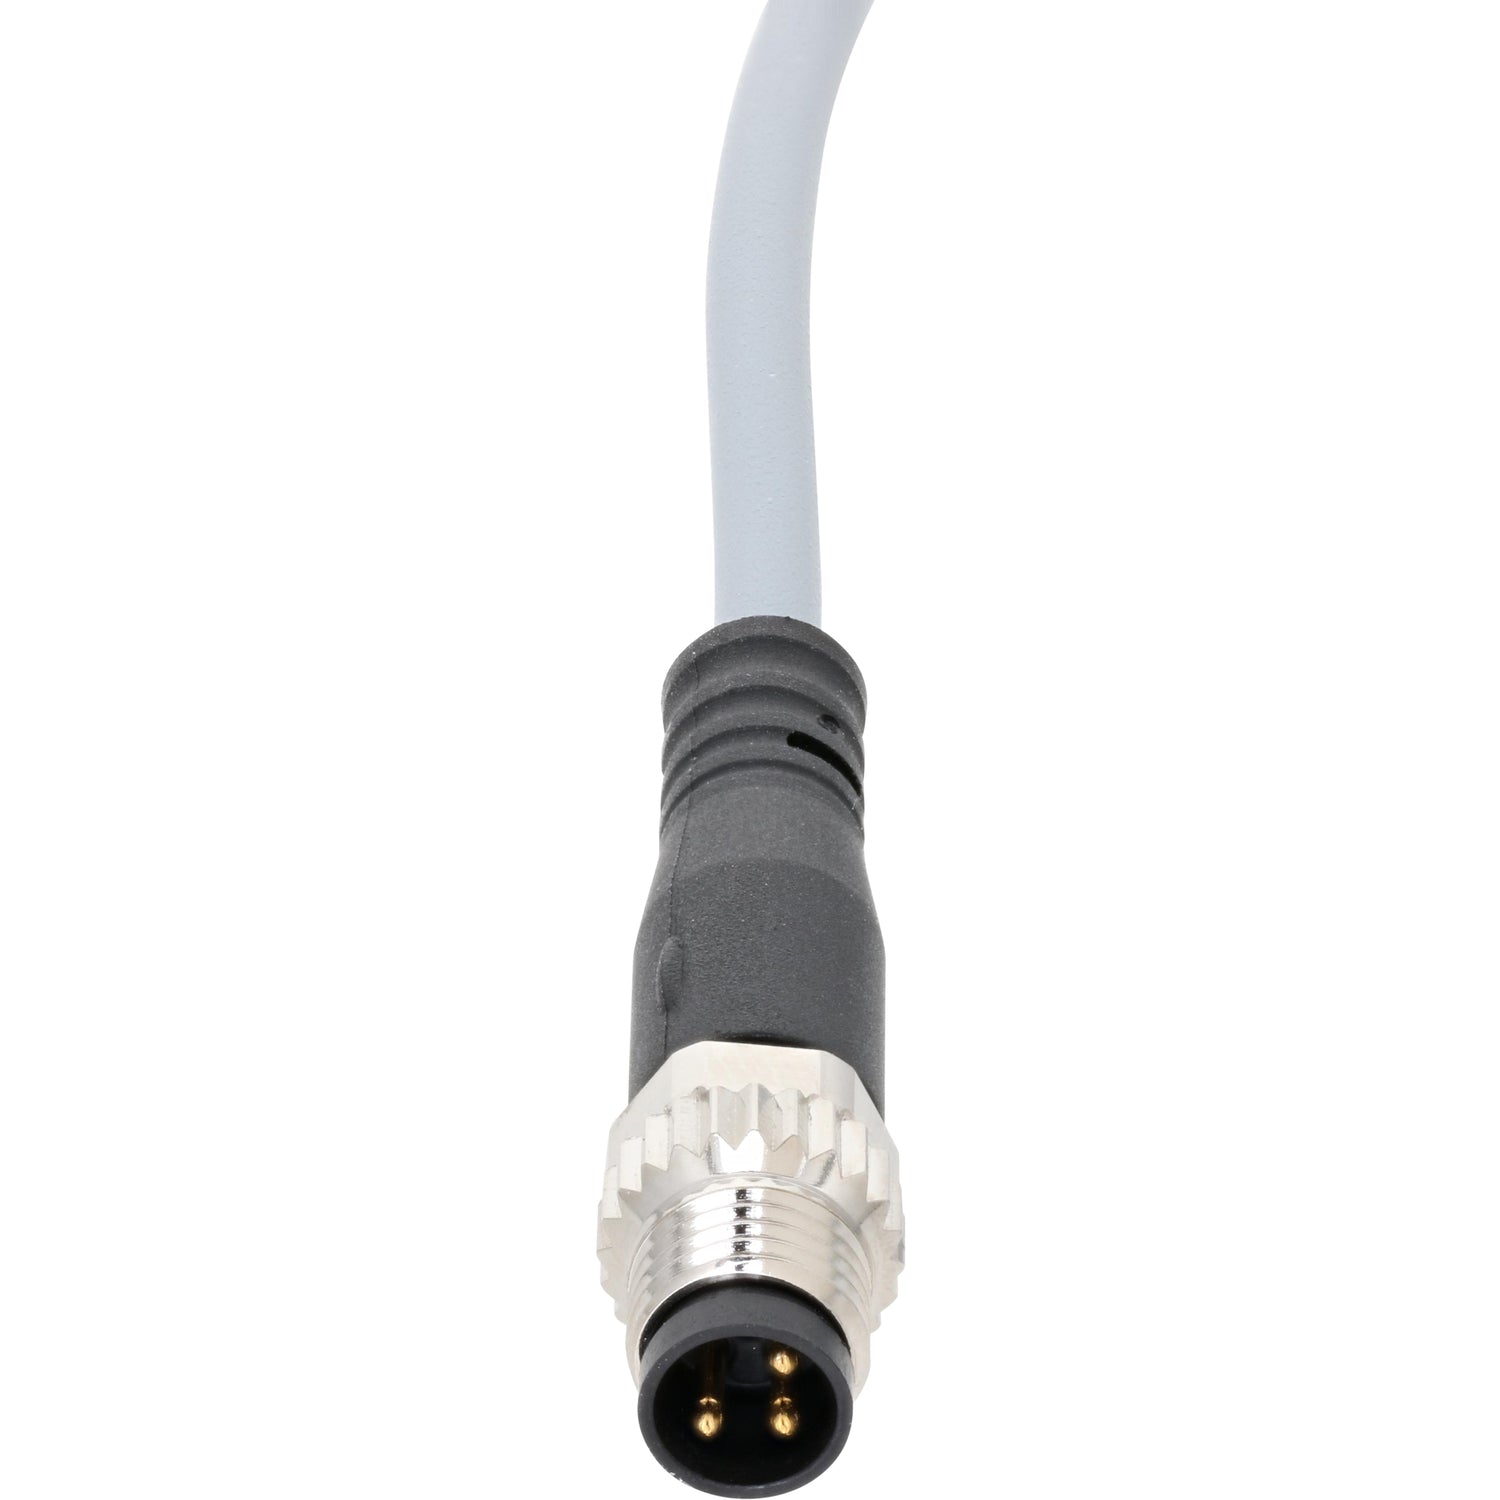 Grey connecting cable with molded black rubber and nickel plated steel male plug showing. Sensor cable is shown on a white back ground. 539052